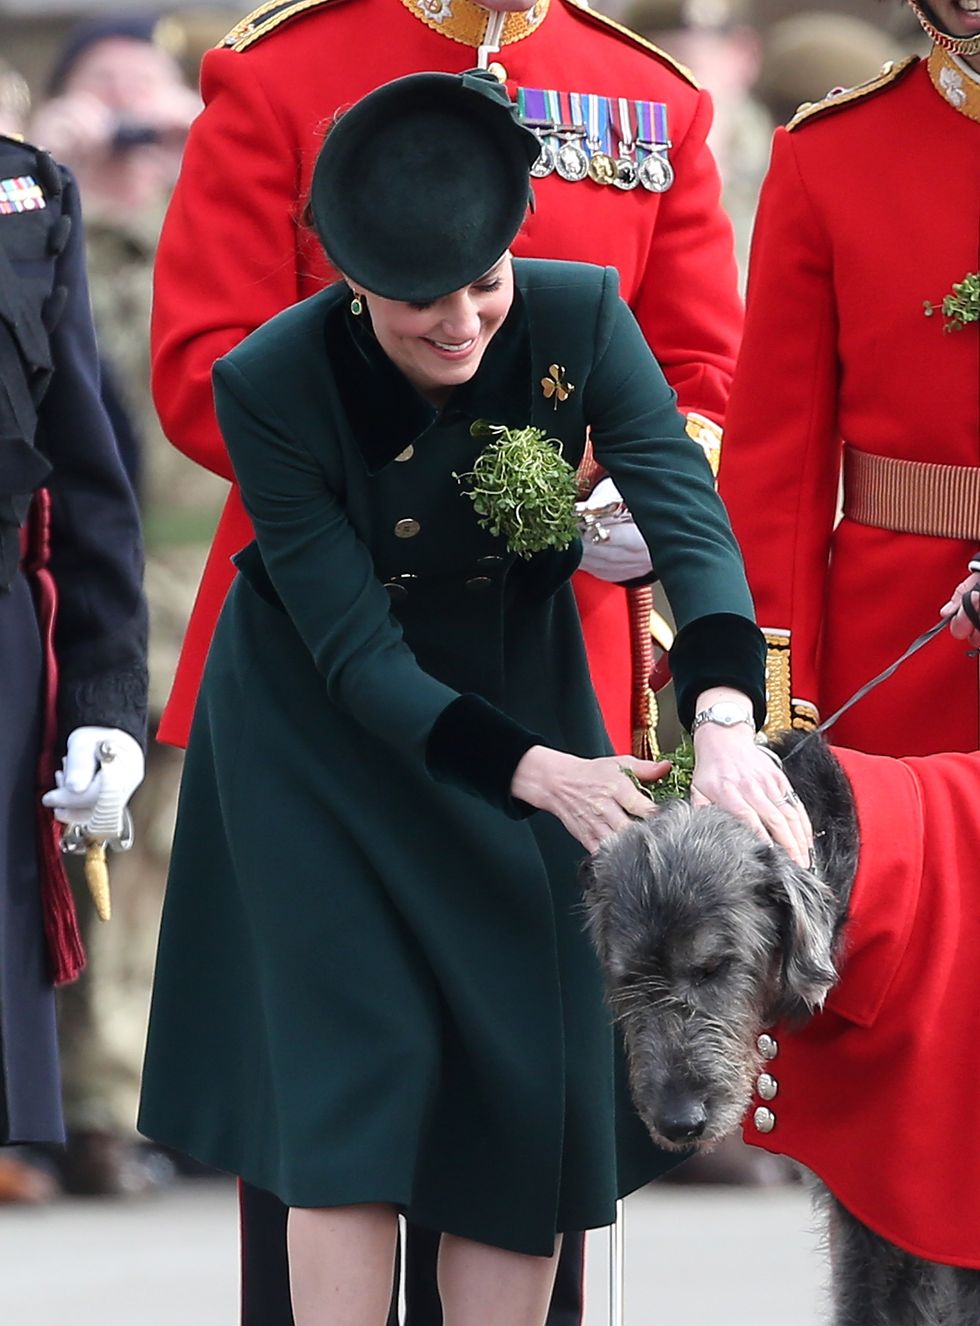 <p>Greeting the&nbsp;First&nbsp;Battalion Irish Guardsmen<span class="redactor-invisible-space" data-redactor-tag="span" data-redactor-class="redactor-invisible-space" data-verified="redactor">'s mascot, an Irish Wolfhound named</span><span class="redactor-invisible-space" data-verified="redactor" data-redactor-tag="span" data-redactor-class="redactor-invisible-space"> Domhnall<span class="redactor-invisible-space" data-verified="redactor" data-redactor-tag="span" data-redactor-class="redactor-invisible-space">,</span>&nbsp;during the annual Irish Guards St Patrick's Day Parade in London<span class="redactor-invisible-space" data-verified="redactor" data-redactor-tag="span" data-redactor-class="redactor-invisible-space">.</span></span></p>